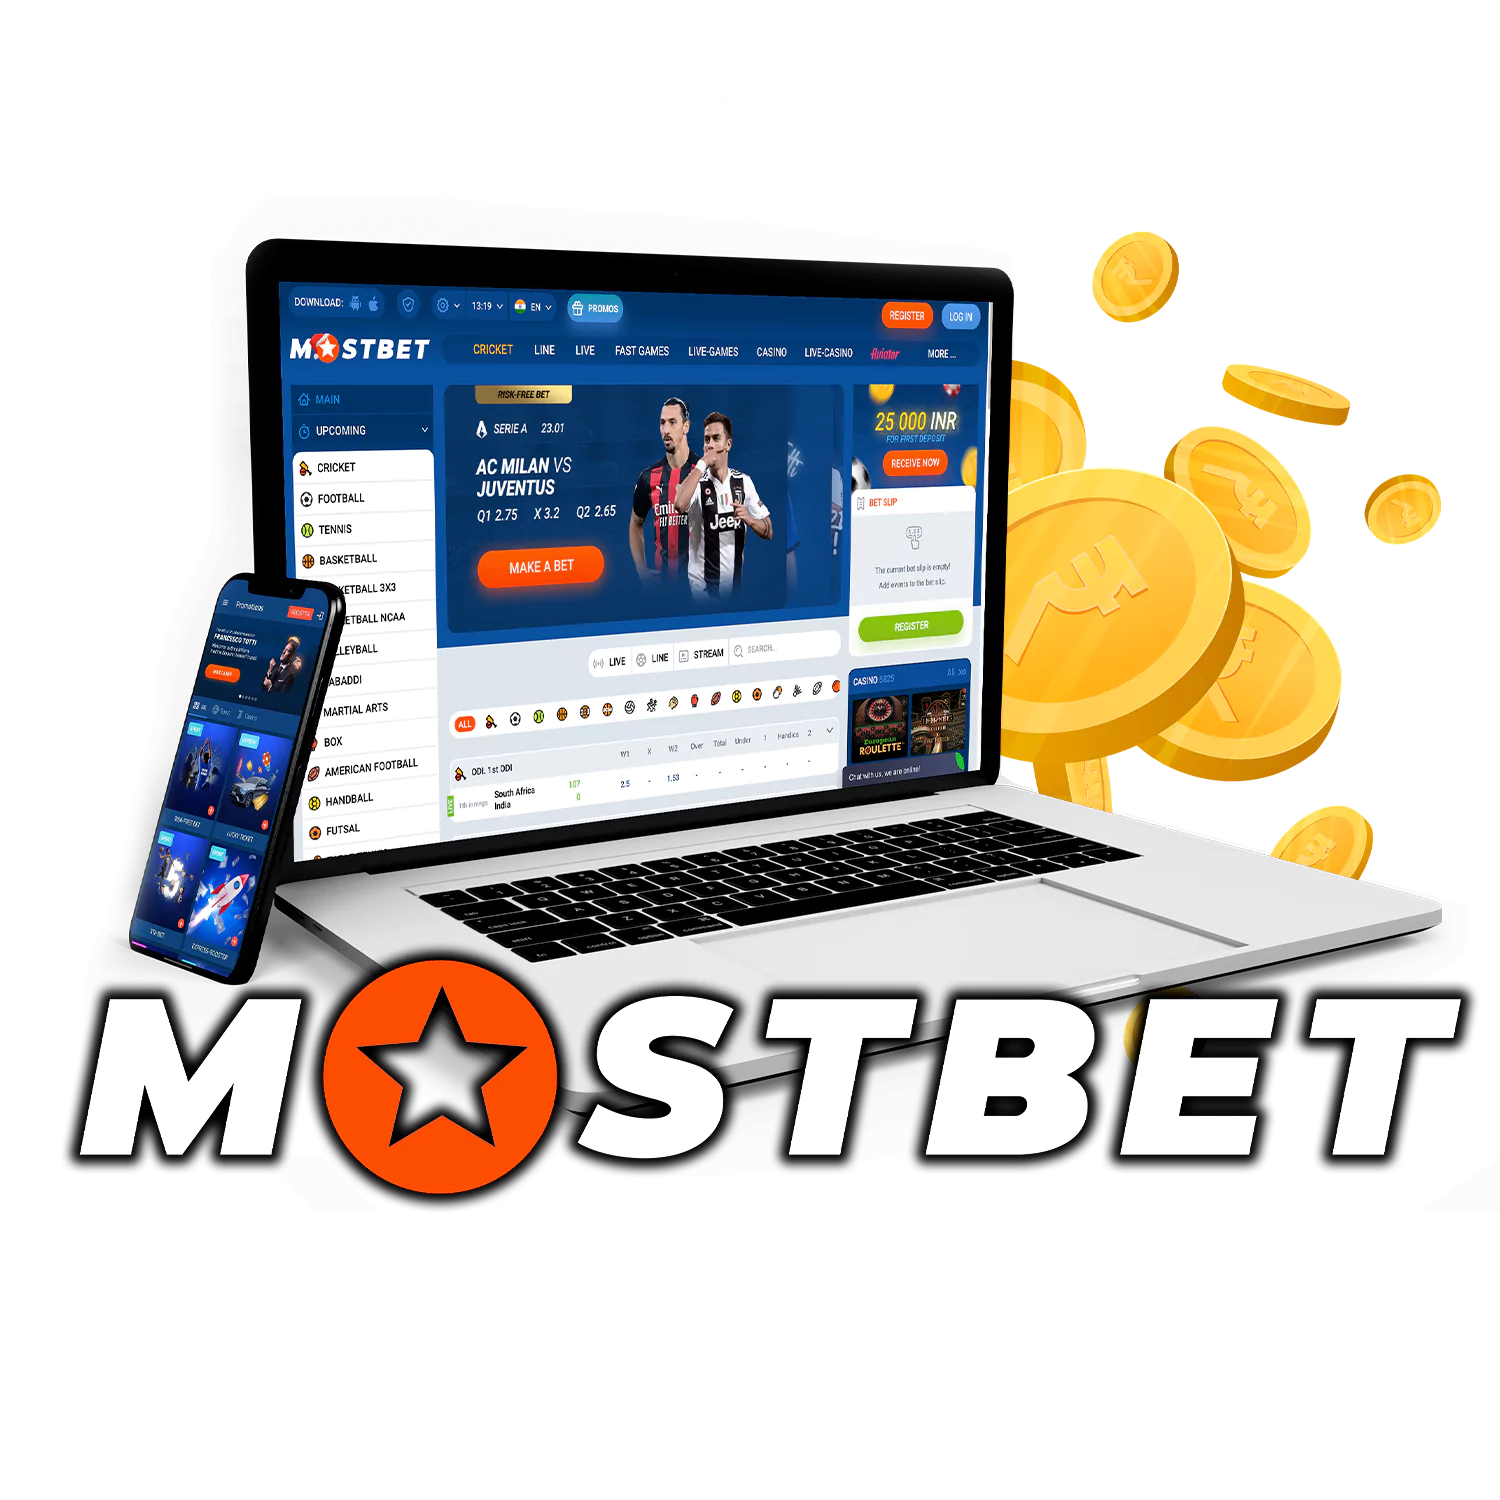 The World's Best Mostbet Cricket emerges as a leading platform for cricket betting, offering an easy and effective registration process and a user-centric betting experience. It stands as a top choice for cricket betting fans, providing comprehensive coverage of cricket e You Can Actually Buy